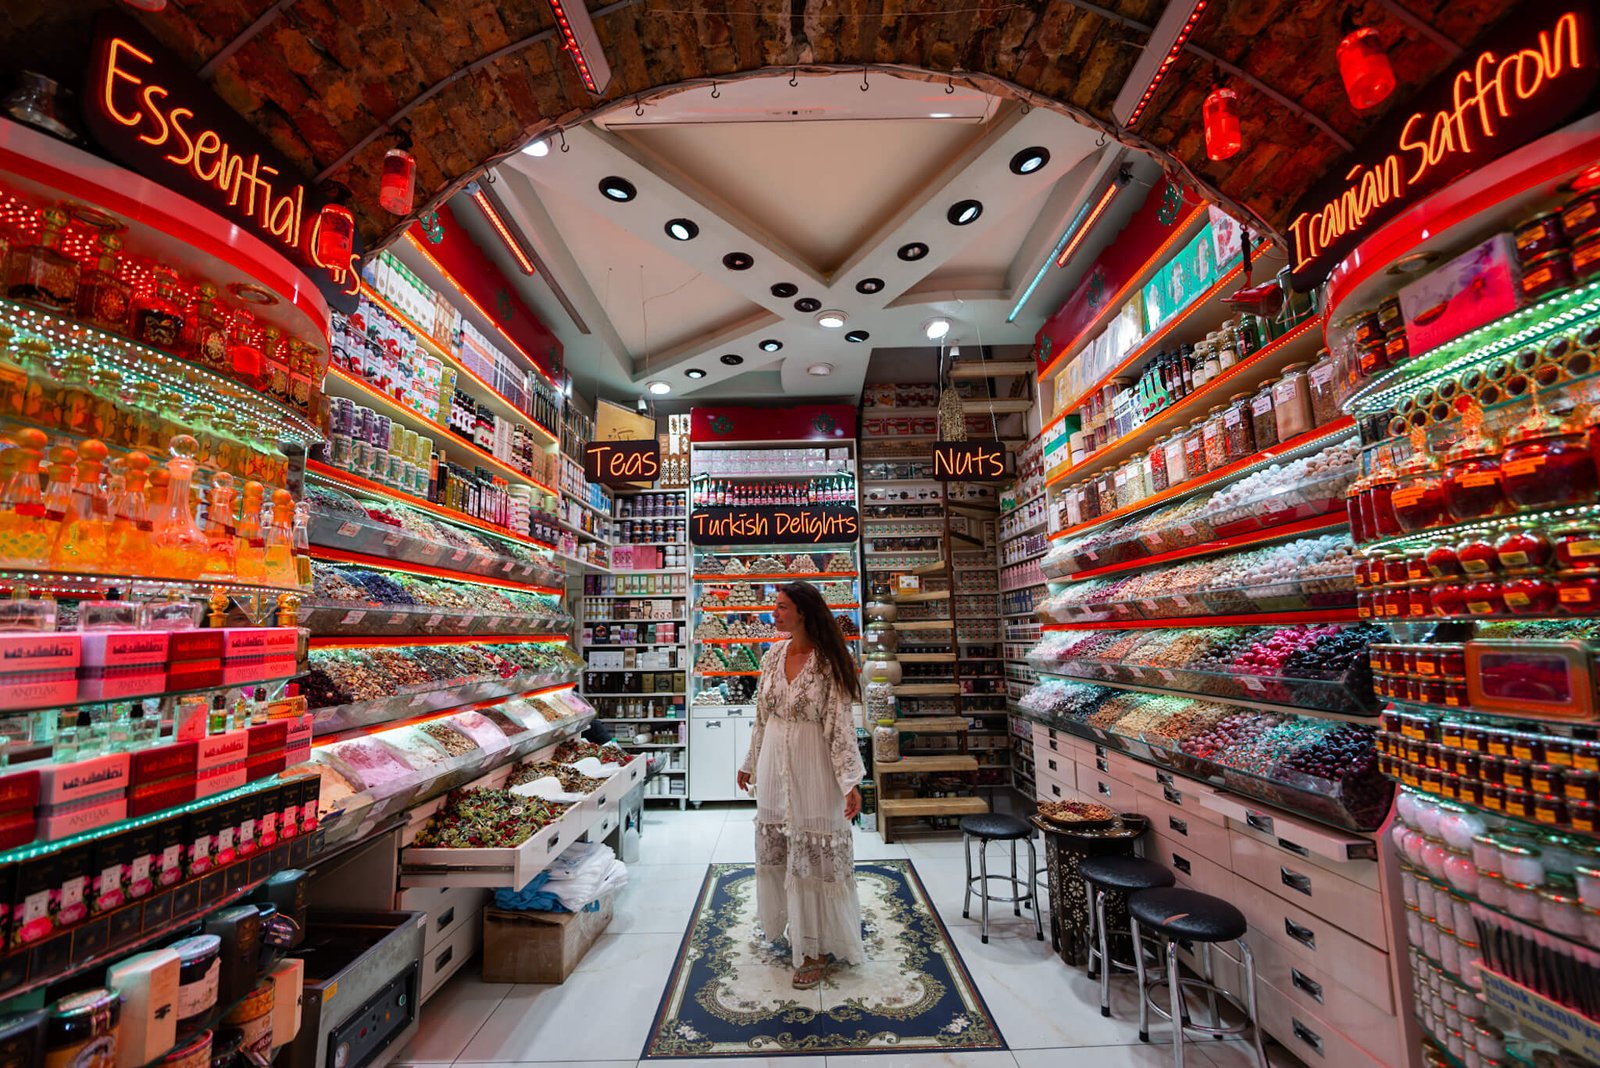 Spice Market, things to do when you travel to Istanbul, Turkey